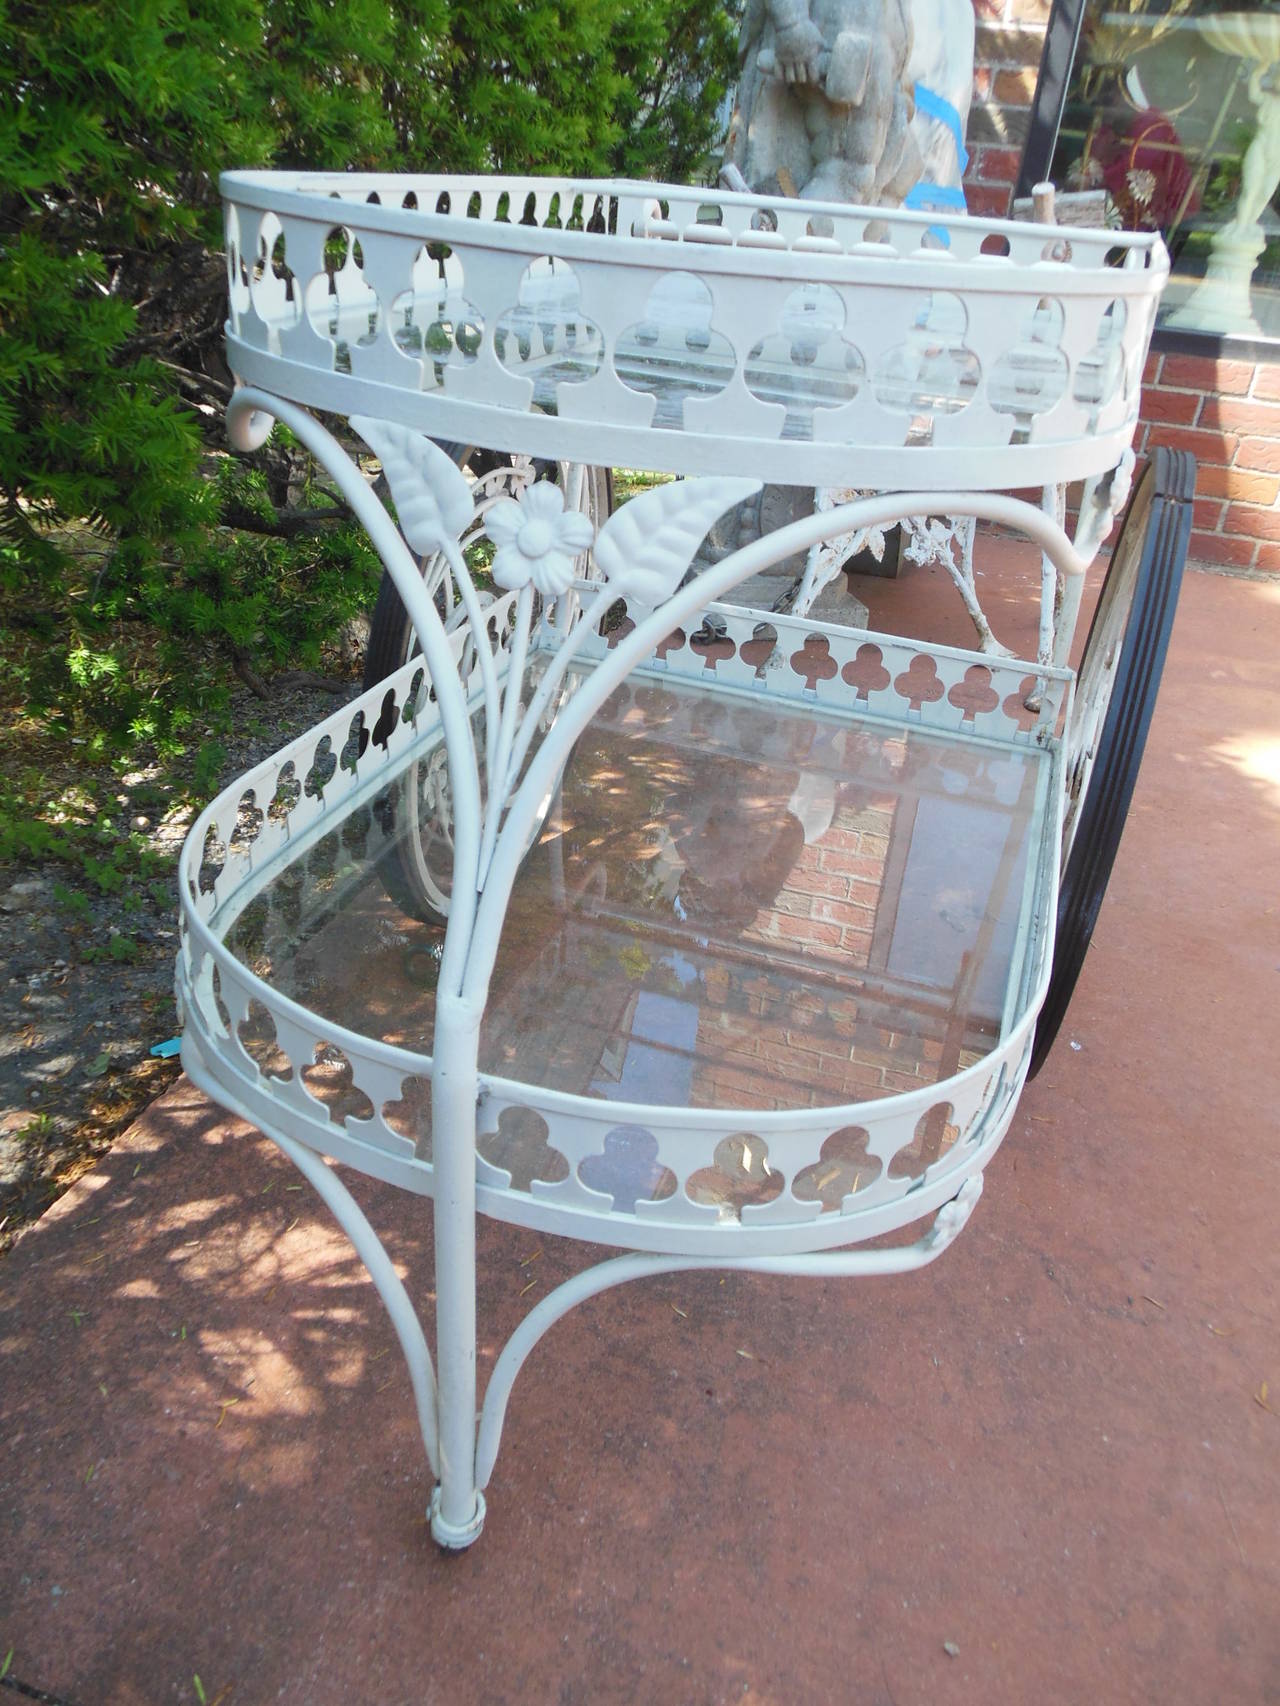 A most elaborate wrought iron tea cart by Salterini. With a huge wheel decorated with banana leaves and flowers. The apron with a border of three leaf clovers. The tea cart maintains its original factory finish. Unfortunately, the top piece of glass